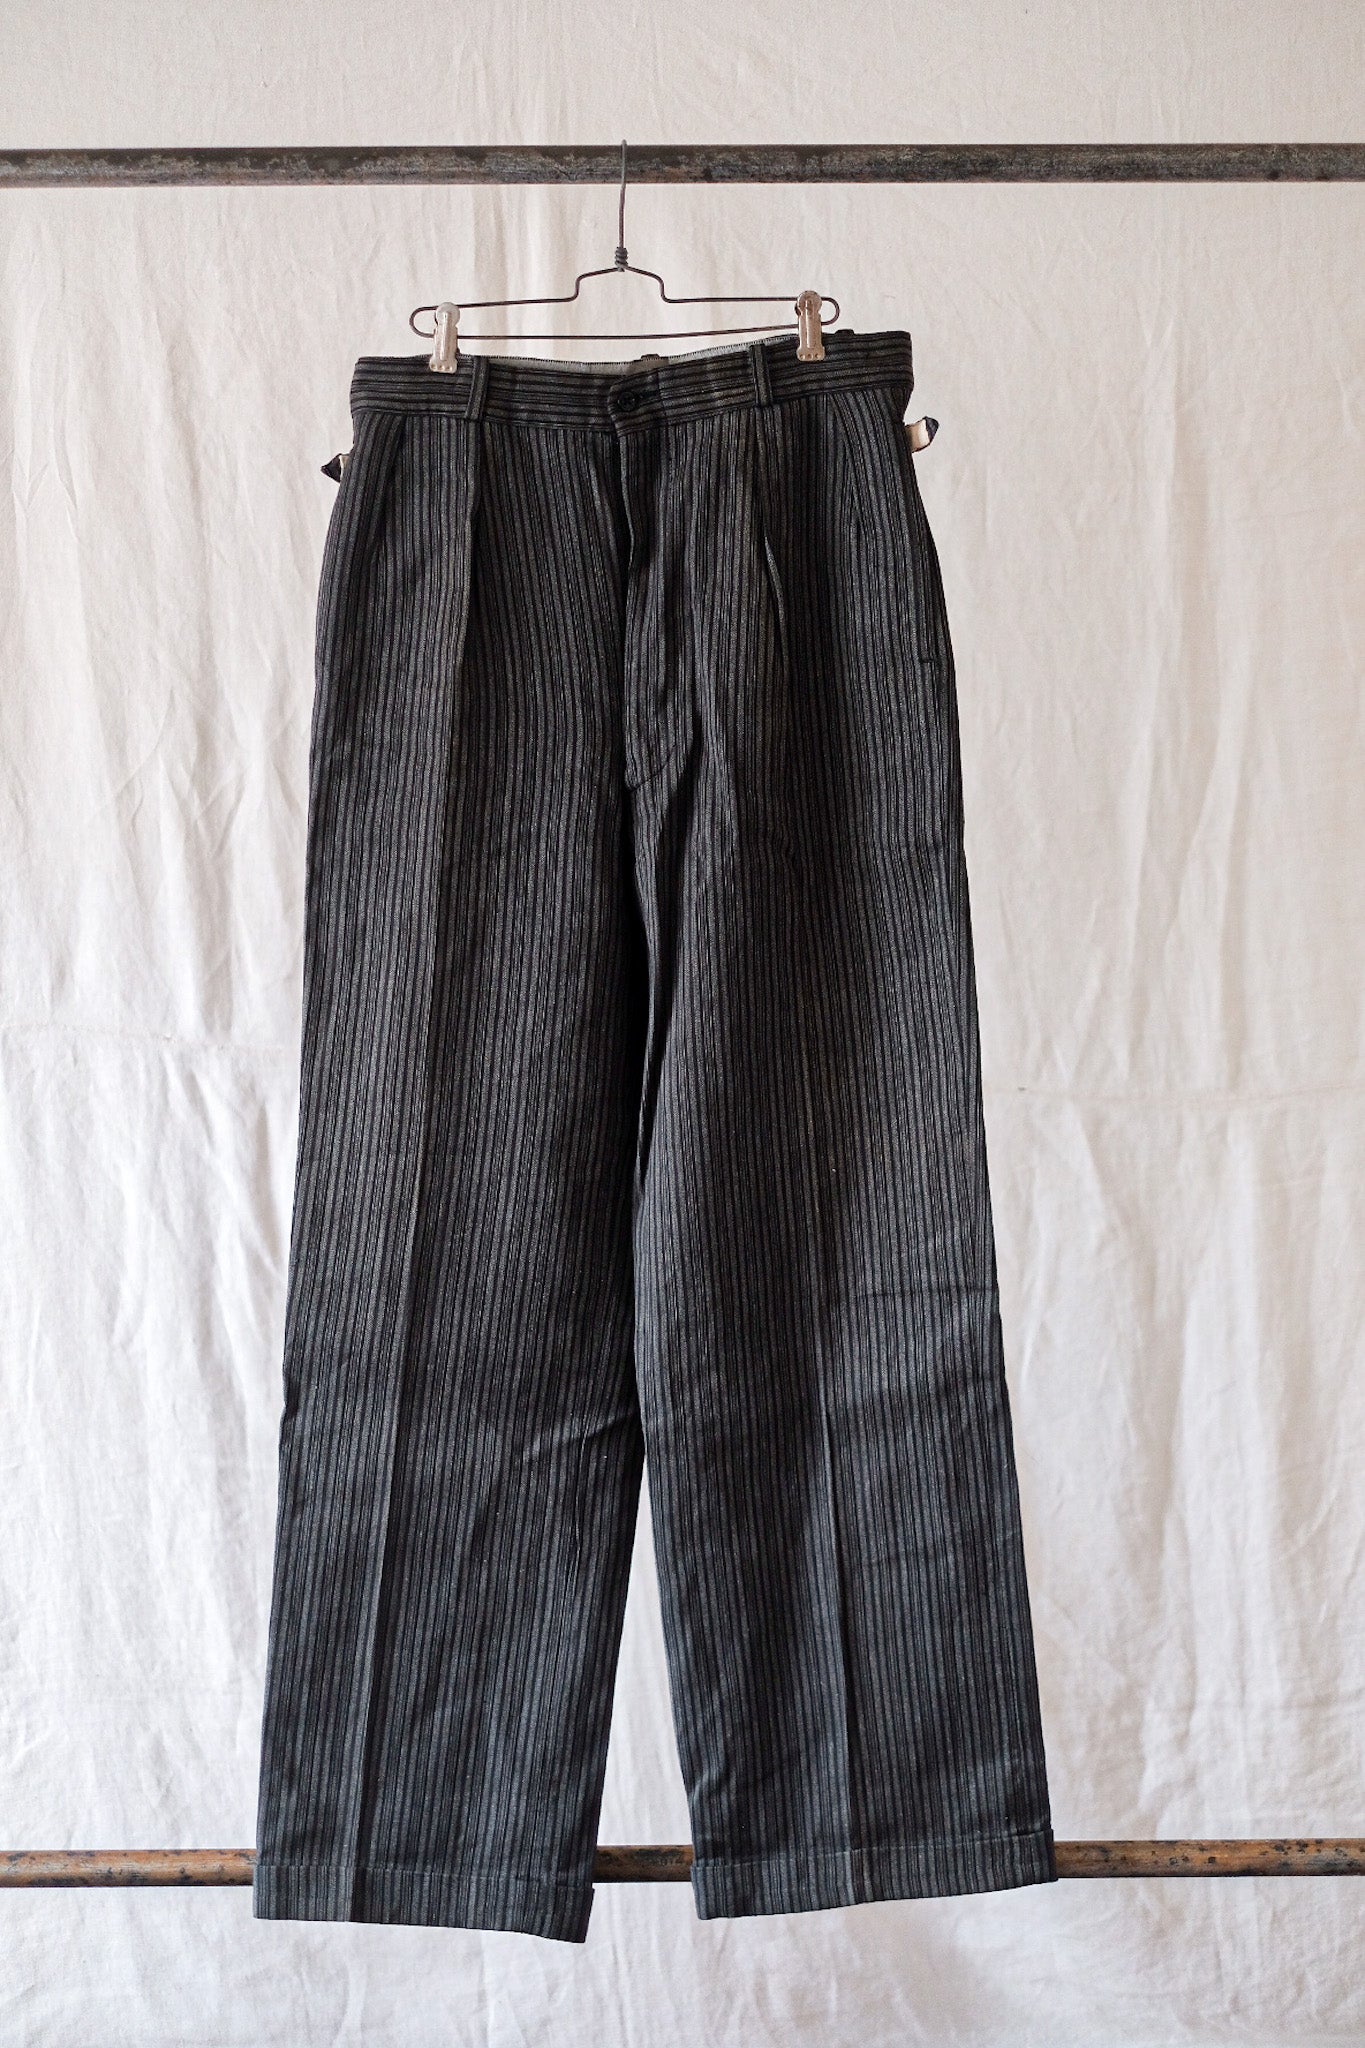 [~ 50's] French Vintage Cotton Wool Striped Work Pants